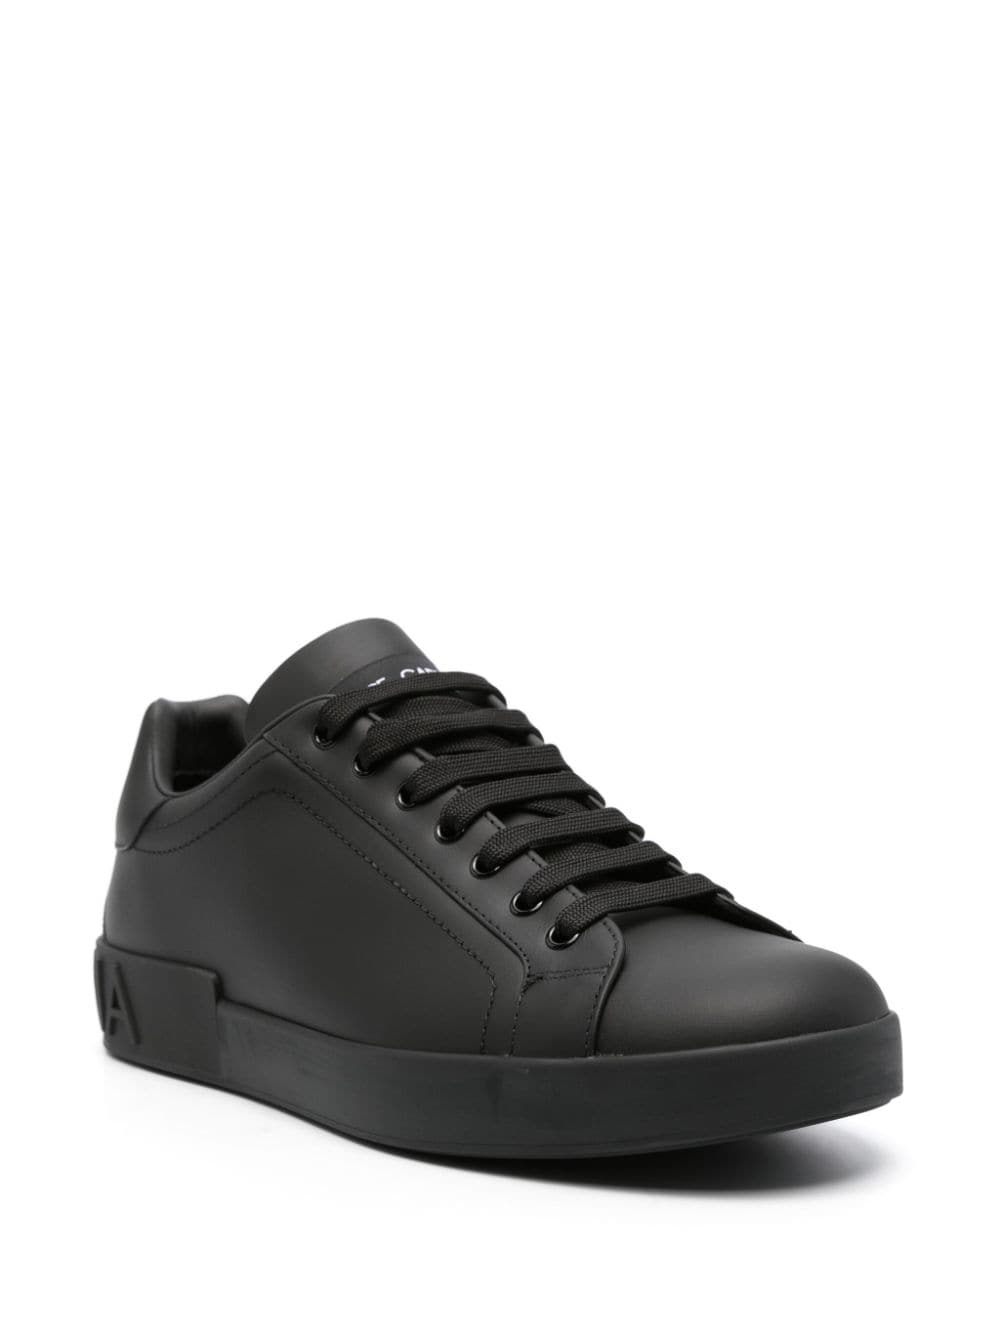 Sneakers total black con logo frontale<br>